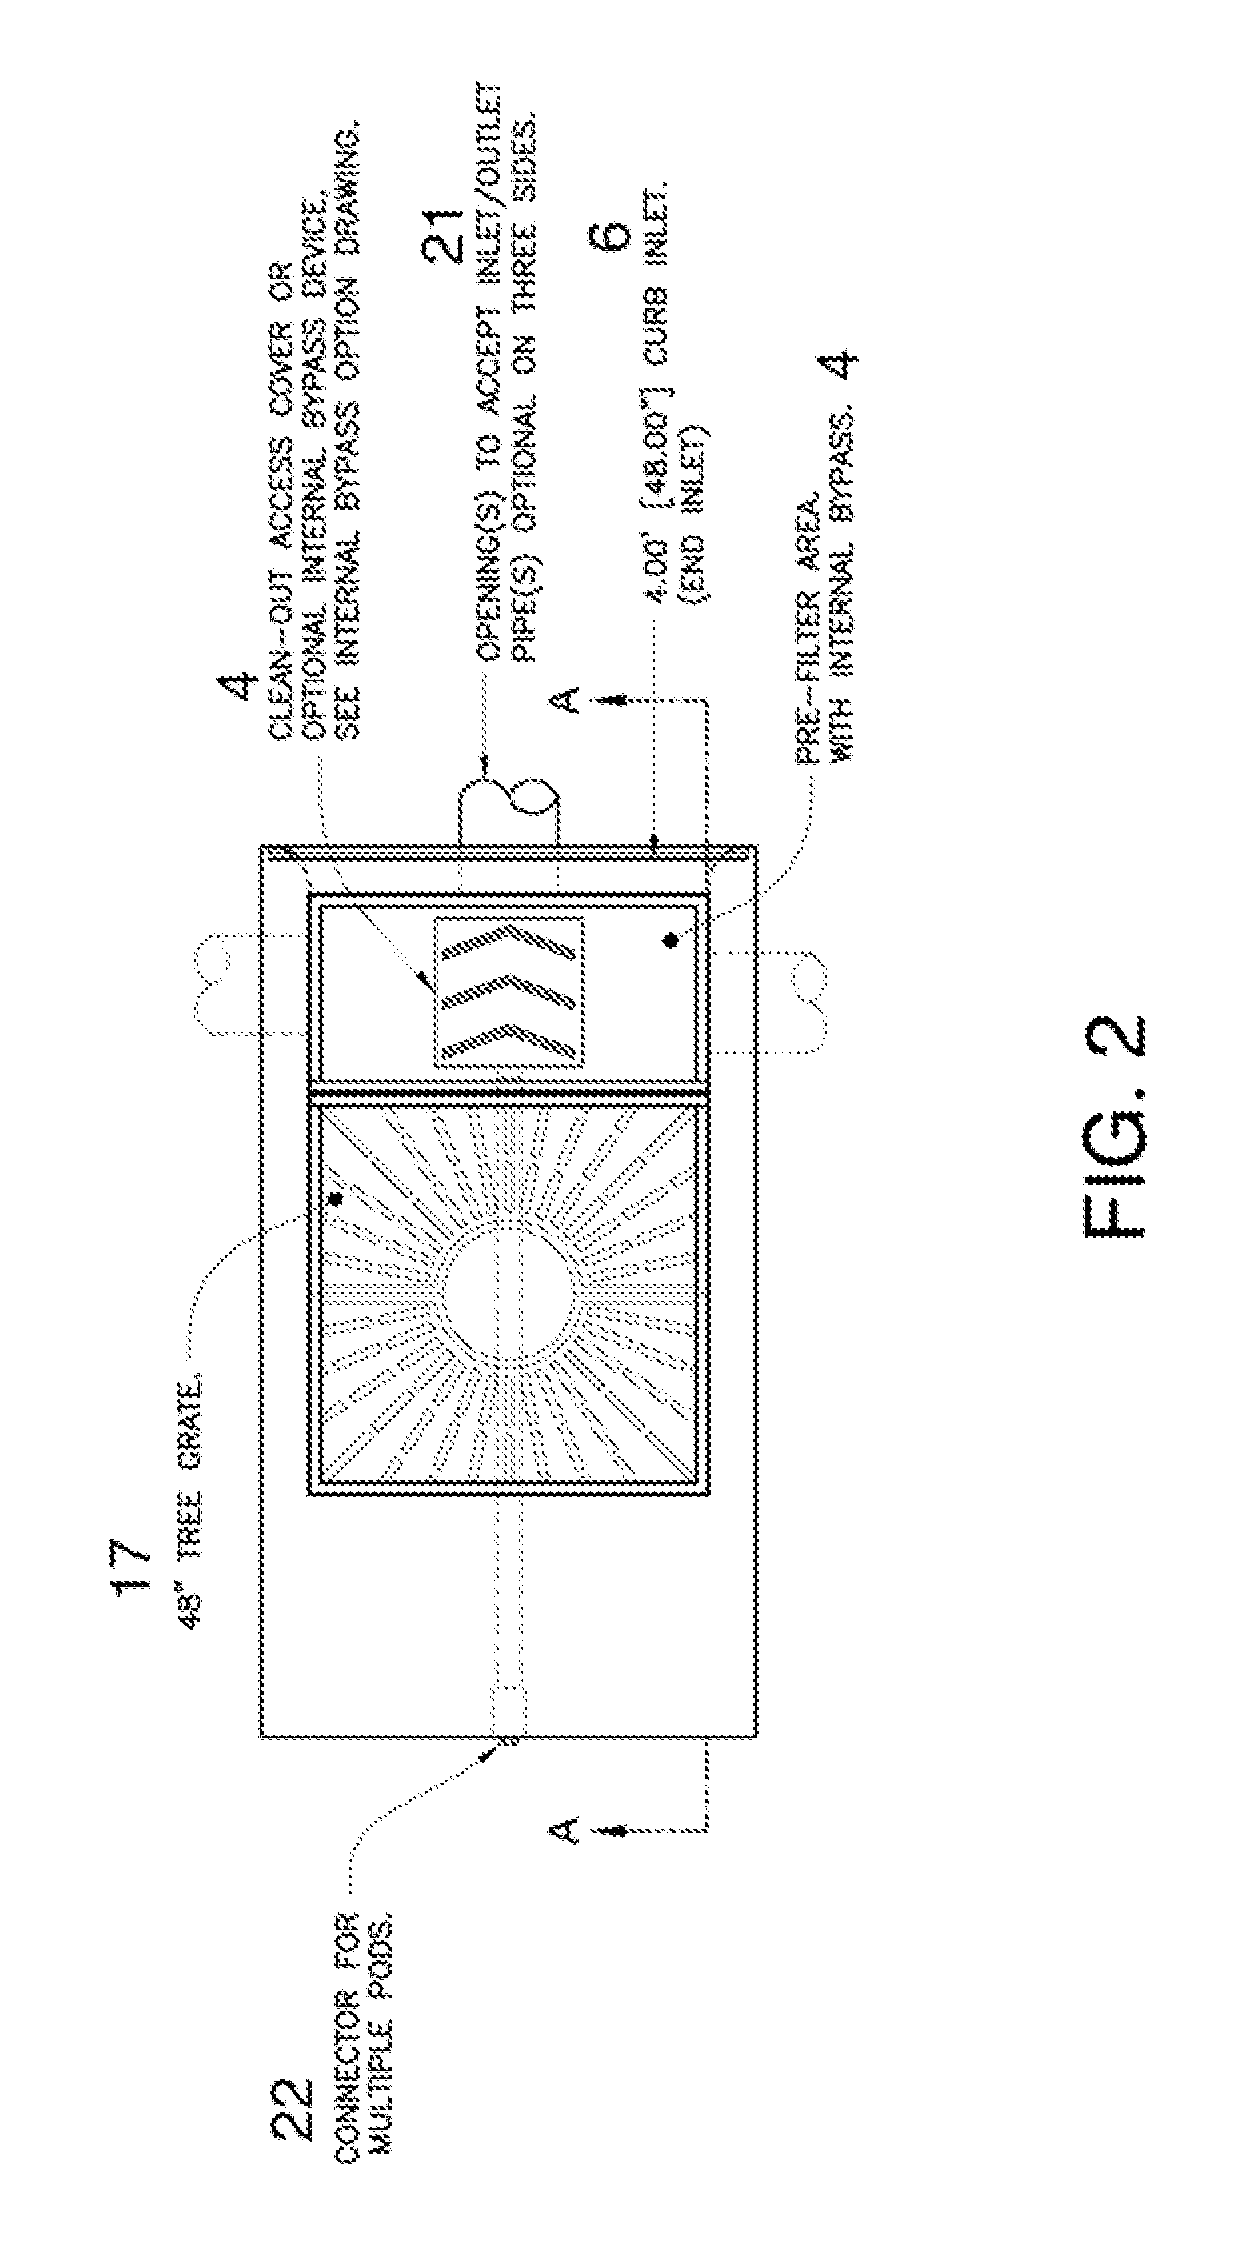 Fixture Cells for Bioretention Systems